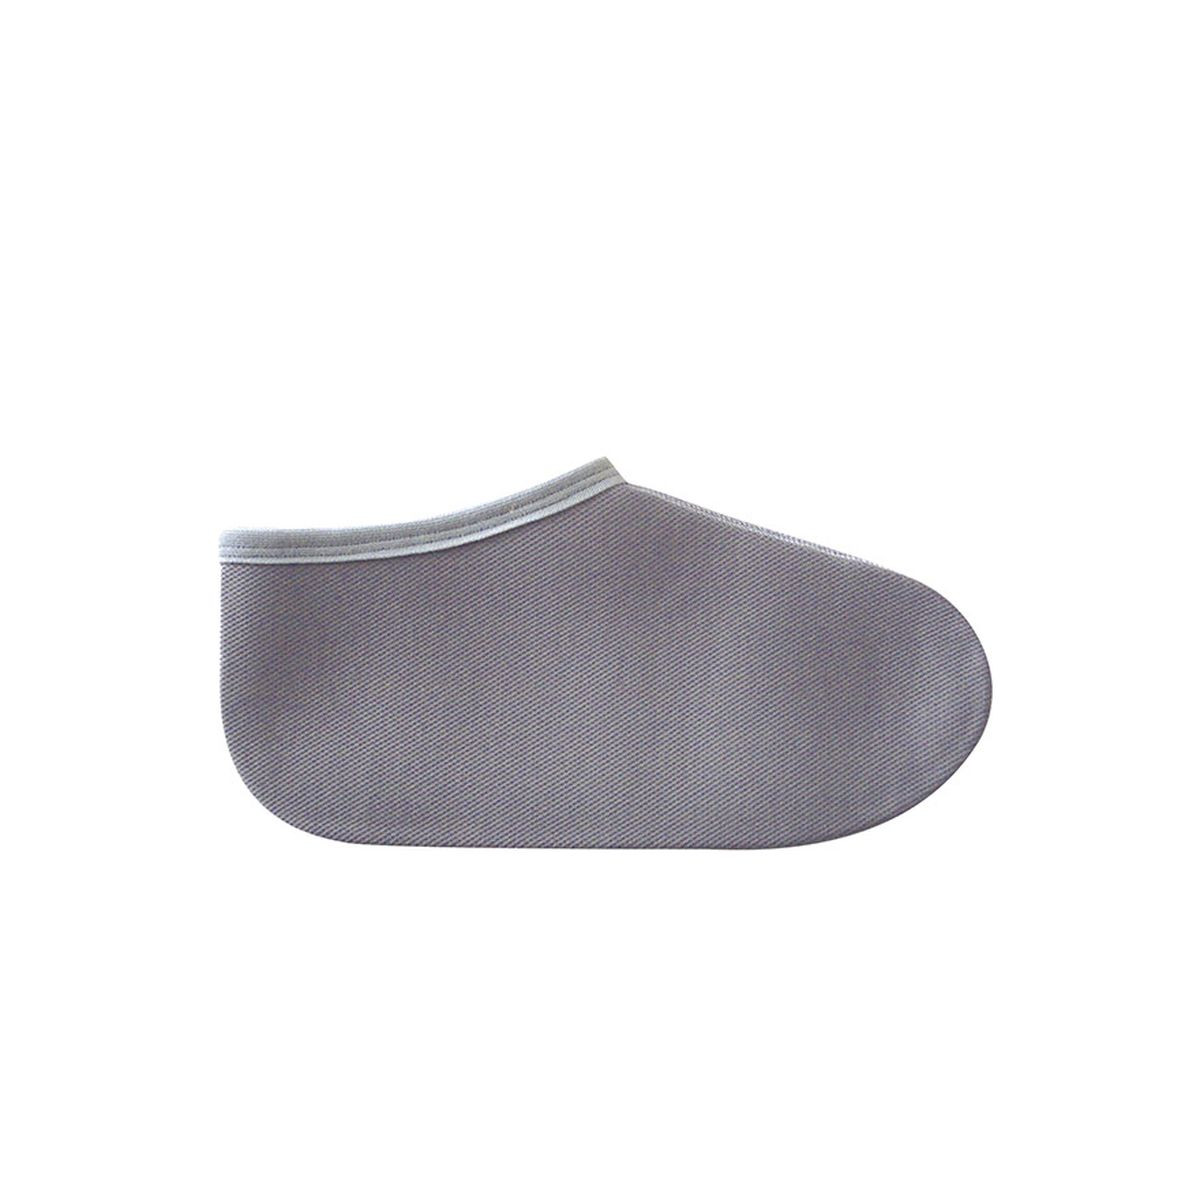 CHAUSSON JERSEY gris T38/39